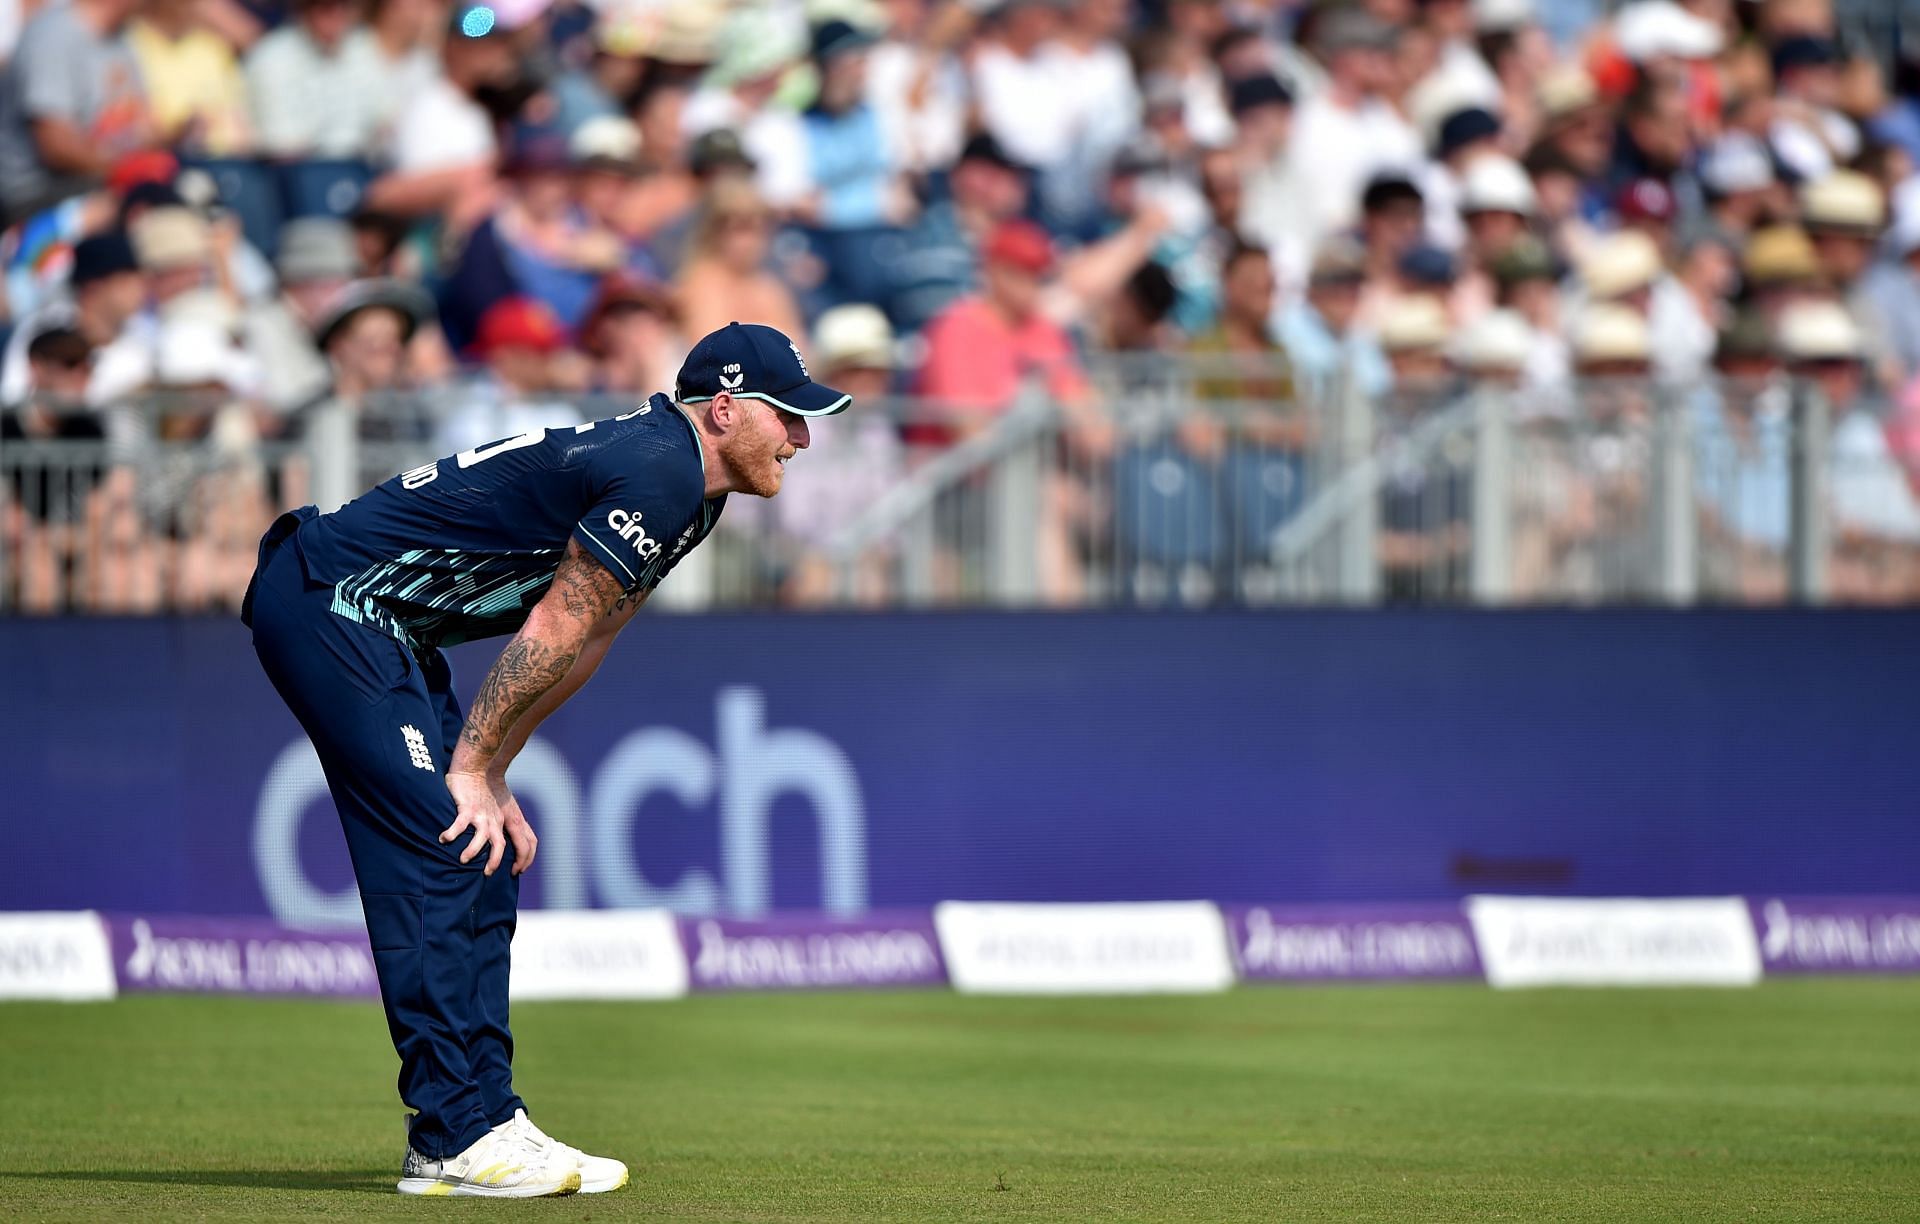 Ben Stokes has had a troubled history with knee injuries